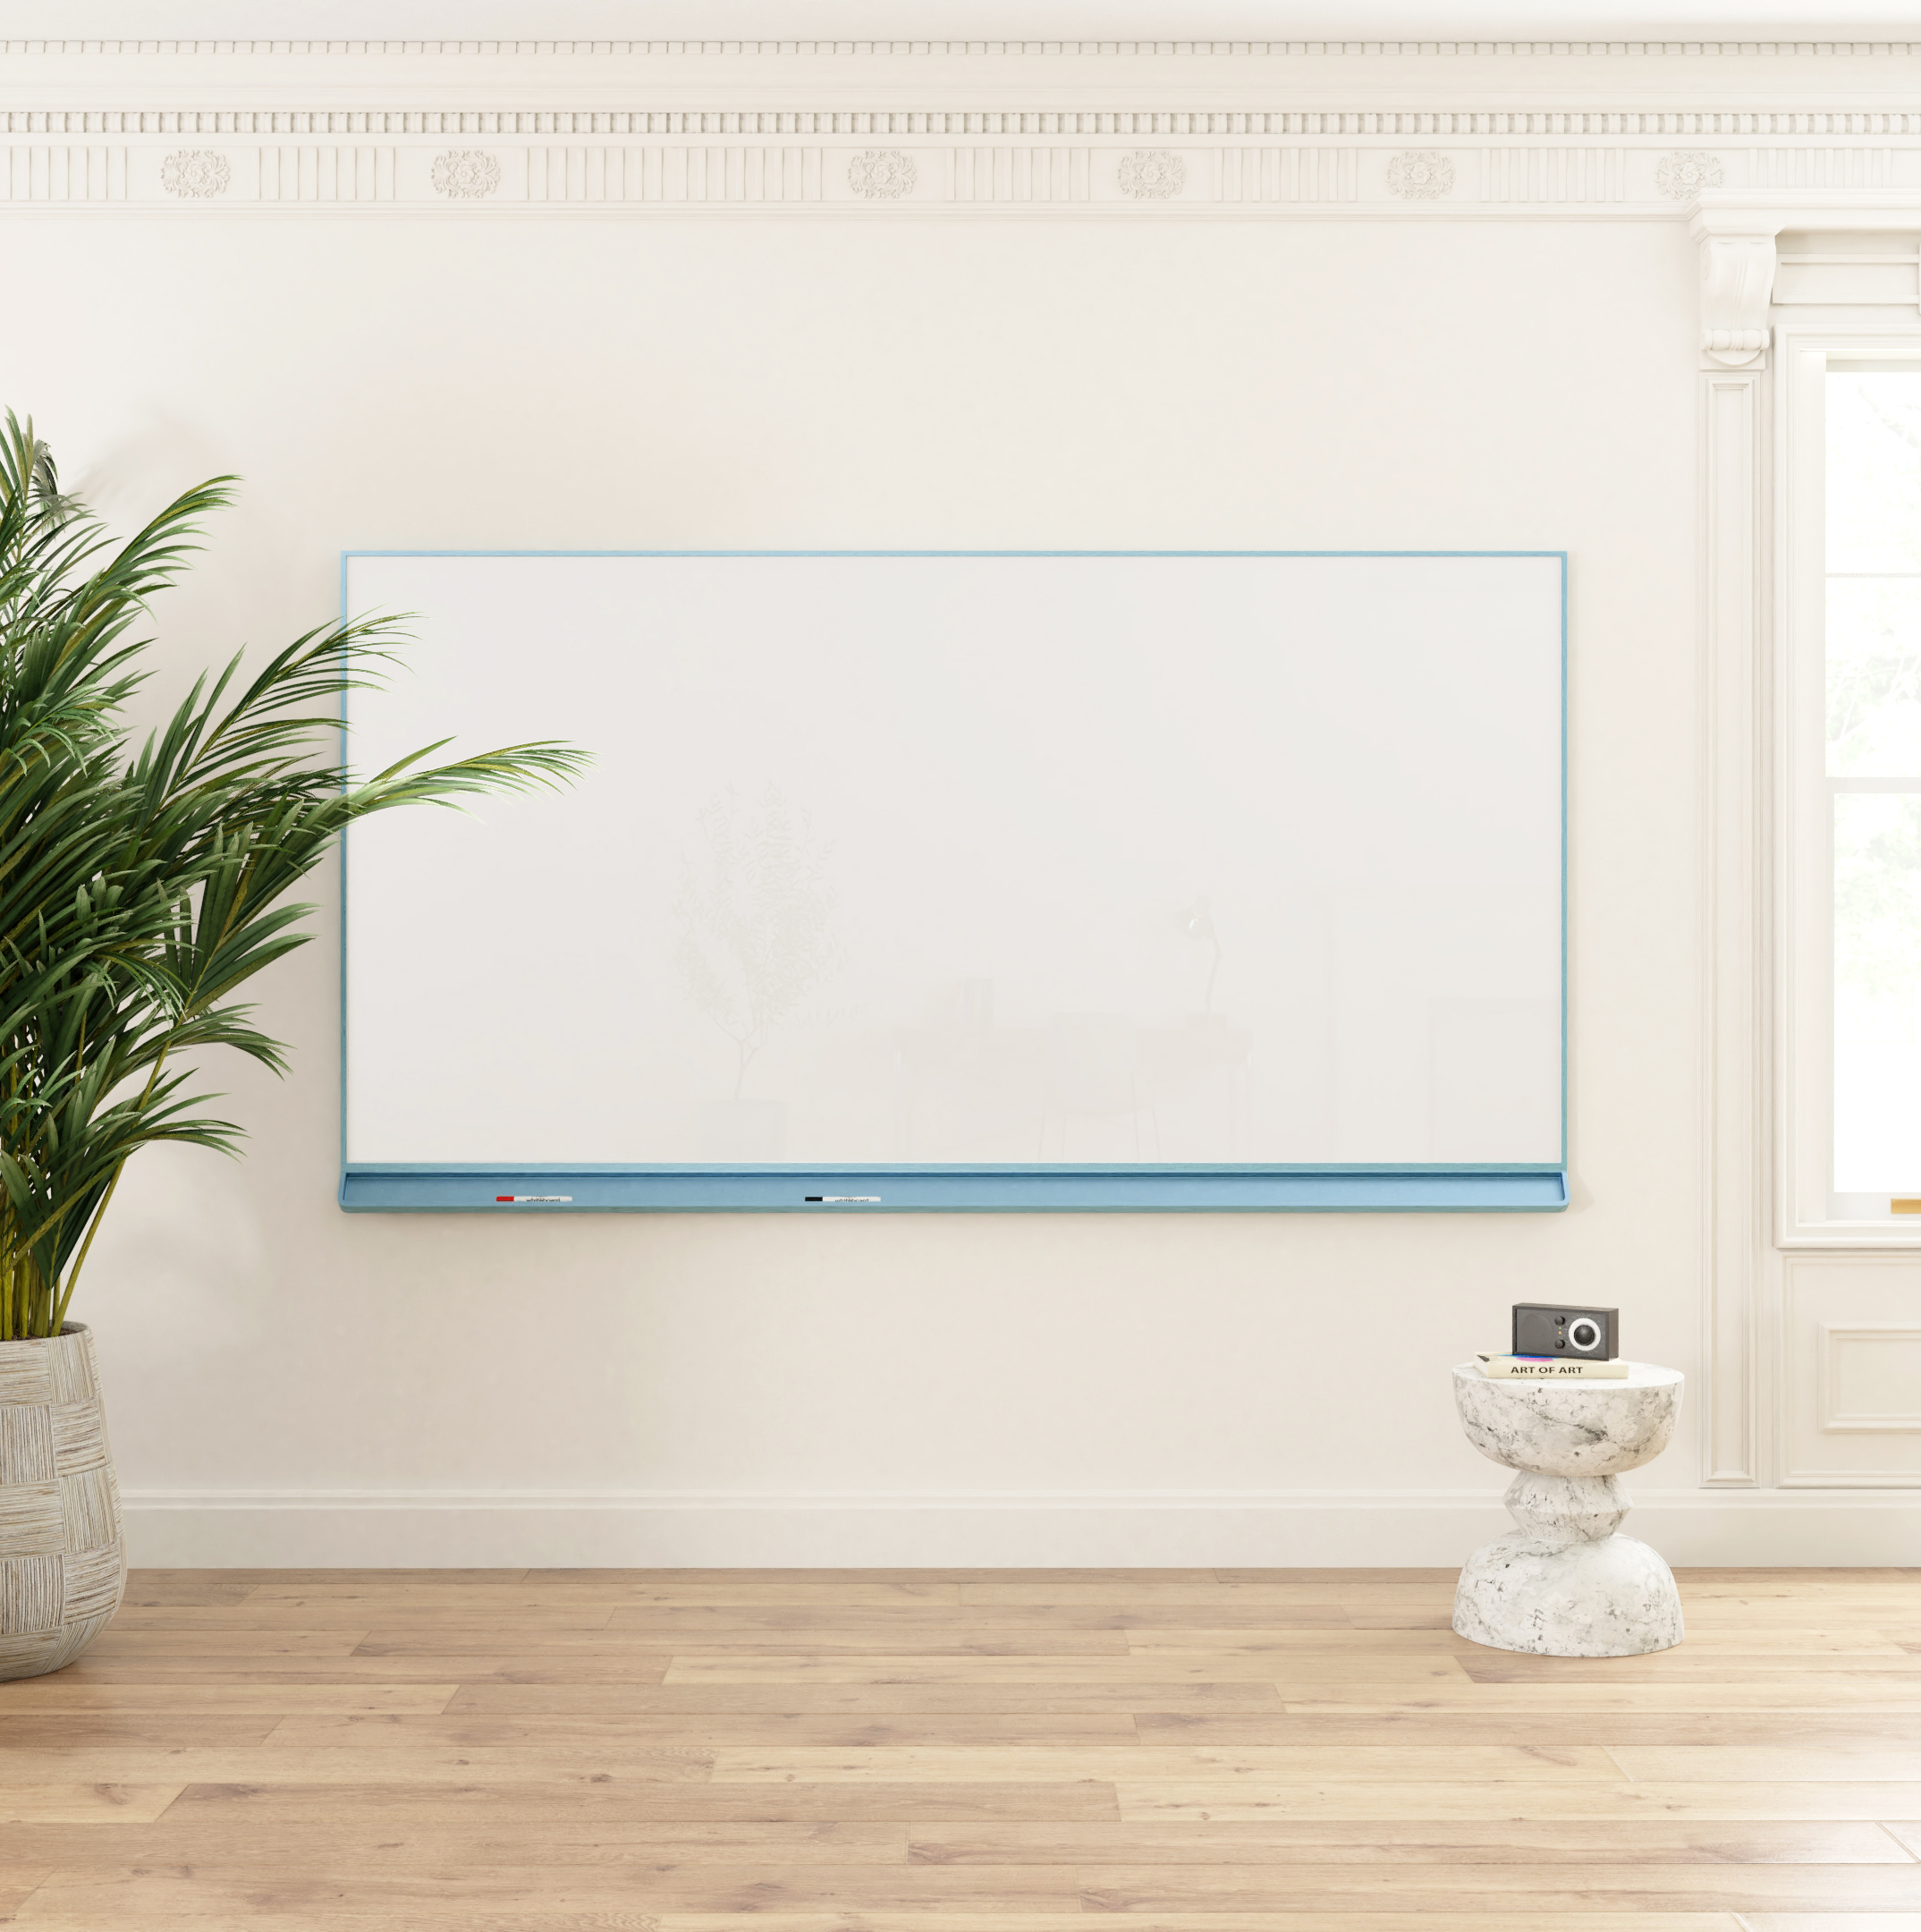 Venue Wall-Mounted Whiteboards